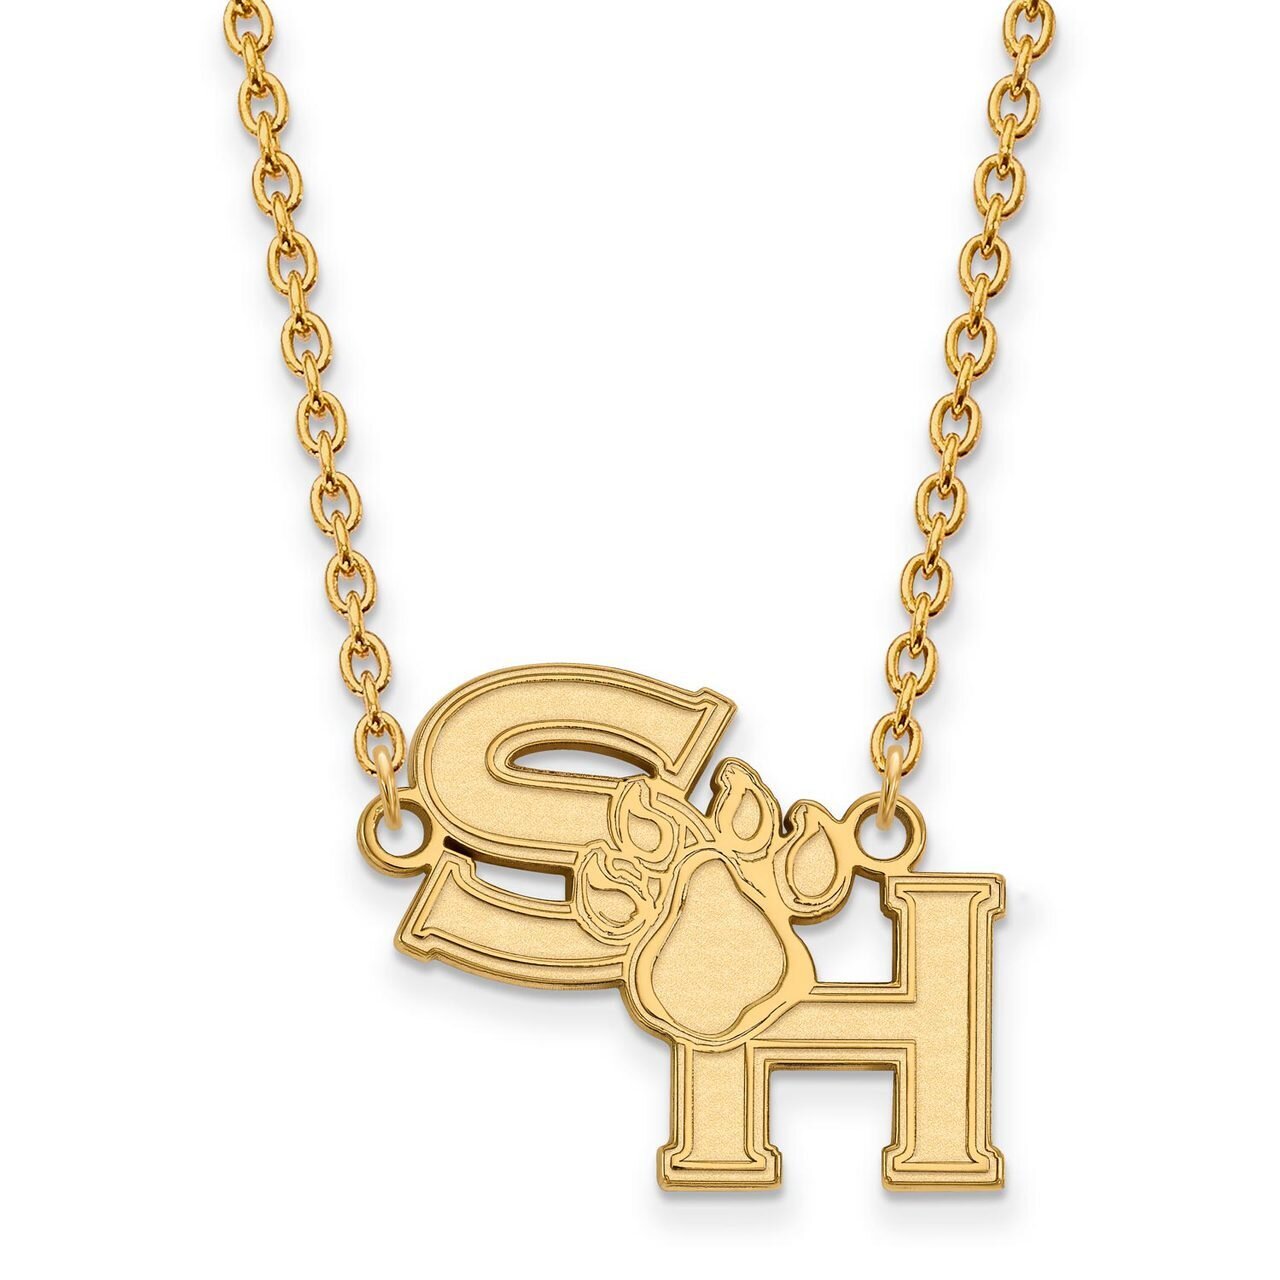 Sam Houston State University Large Pendant with Chain Necklace 14k Yellow Gold 4Y006SHS-18